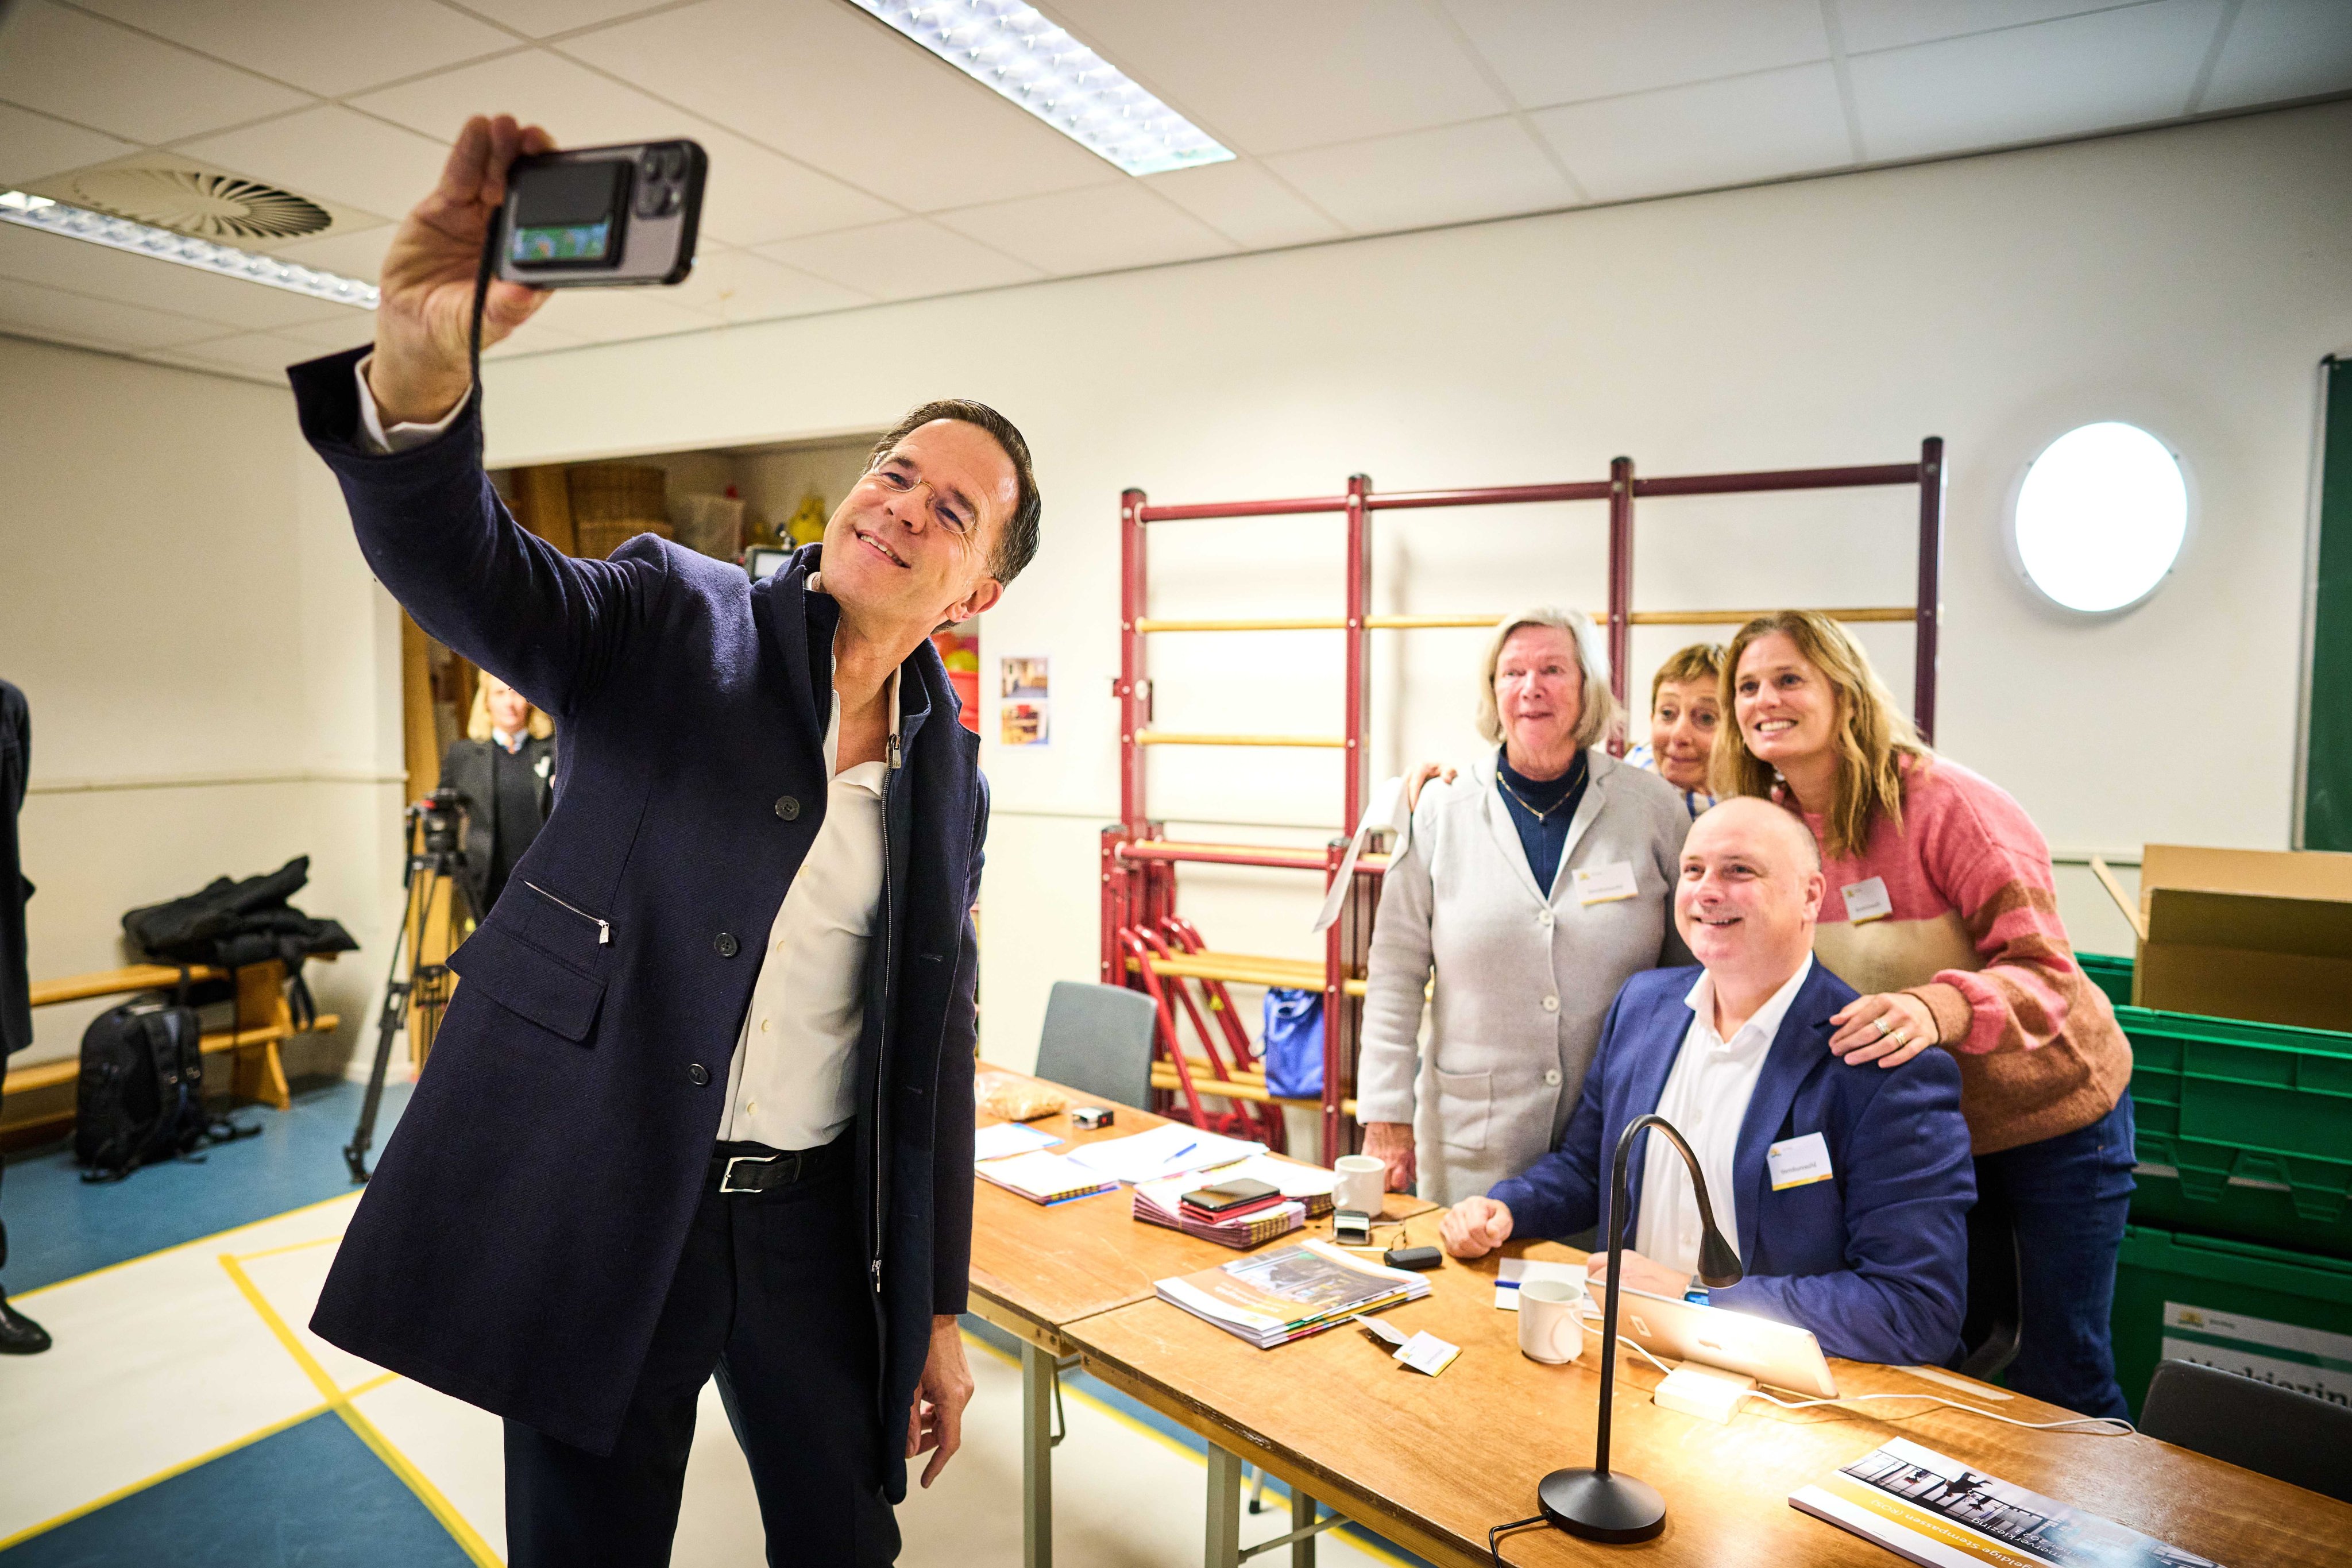 Outgoing Prime Minister Mark Rutte takes a selfie with election workers at a polling station in The Hague, the Netherlands, on Wednesday. Photo: EPA-EFE